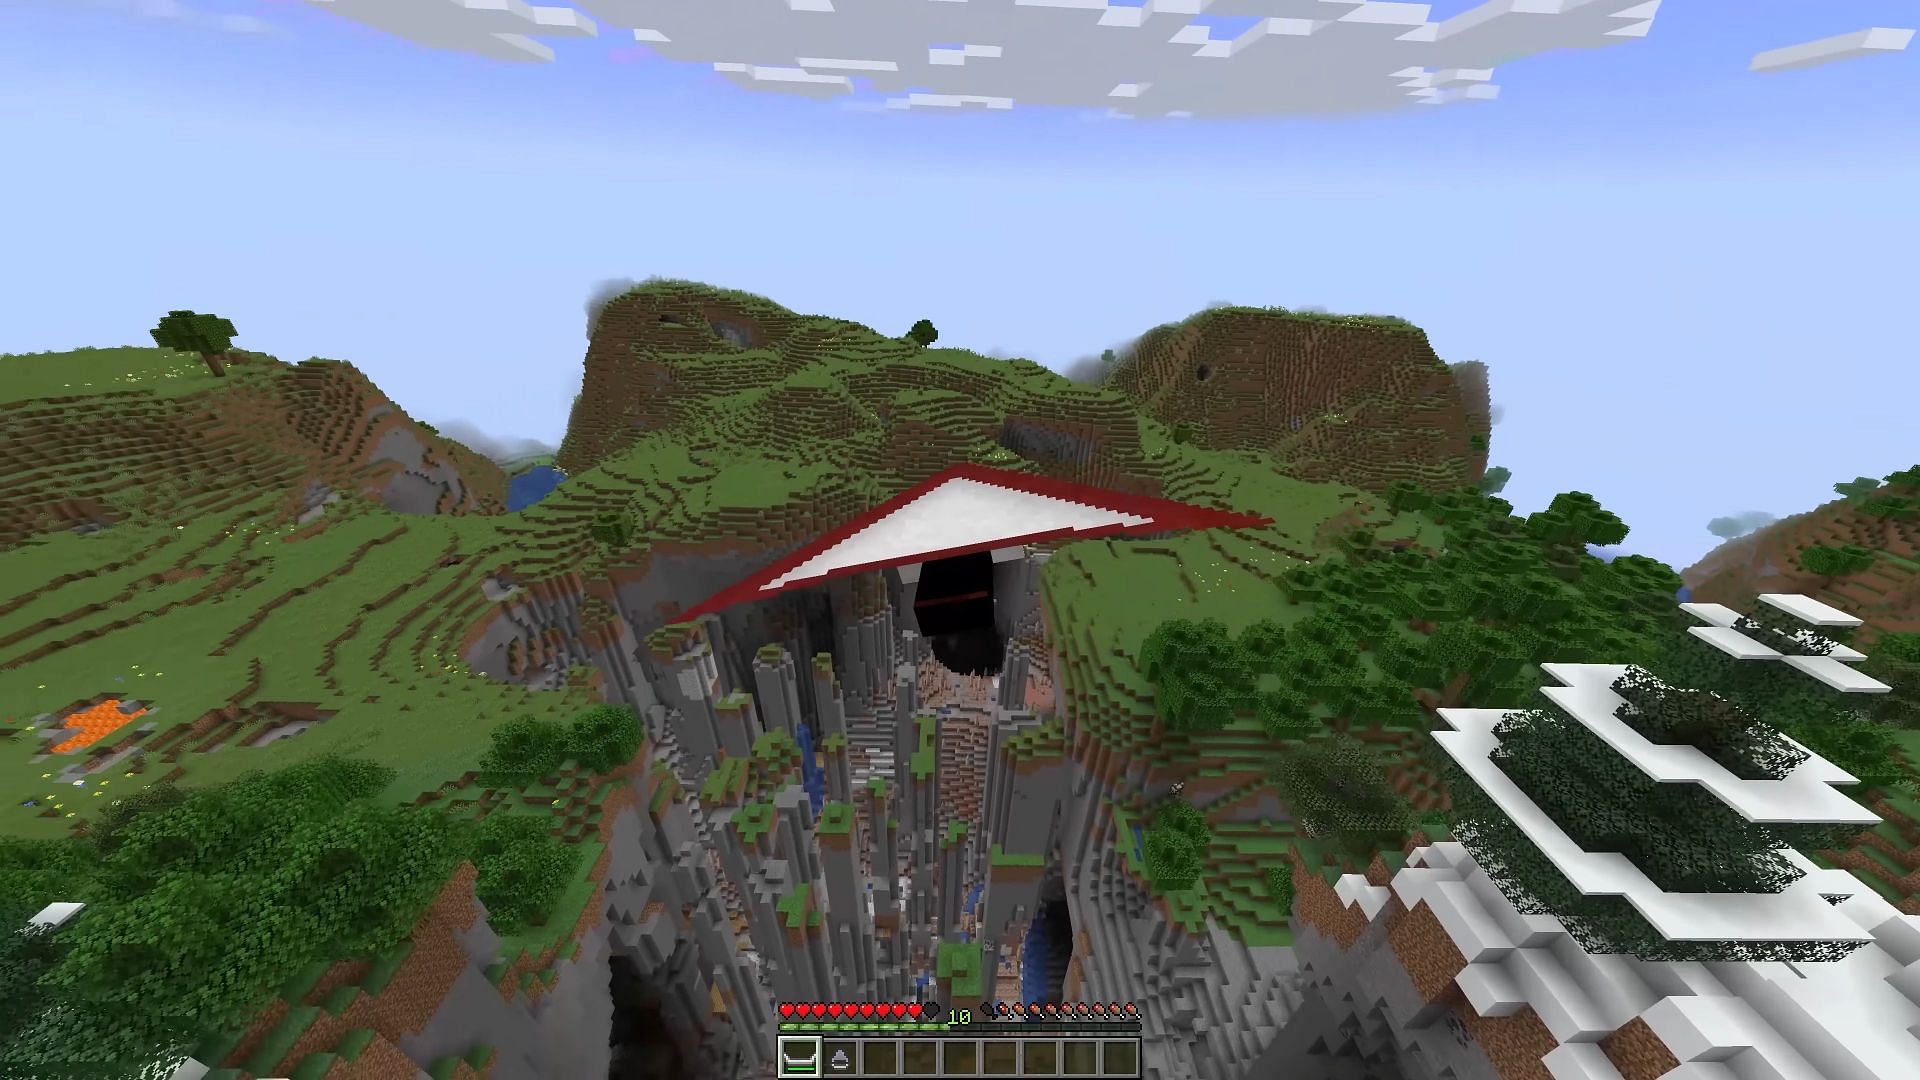 Hang Glider, as the name implies, adds upgradeable hang gliders to Minecraft (Image via AsianHalfSquat/YouTube)